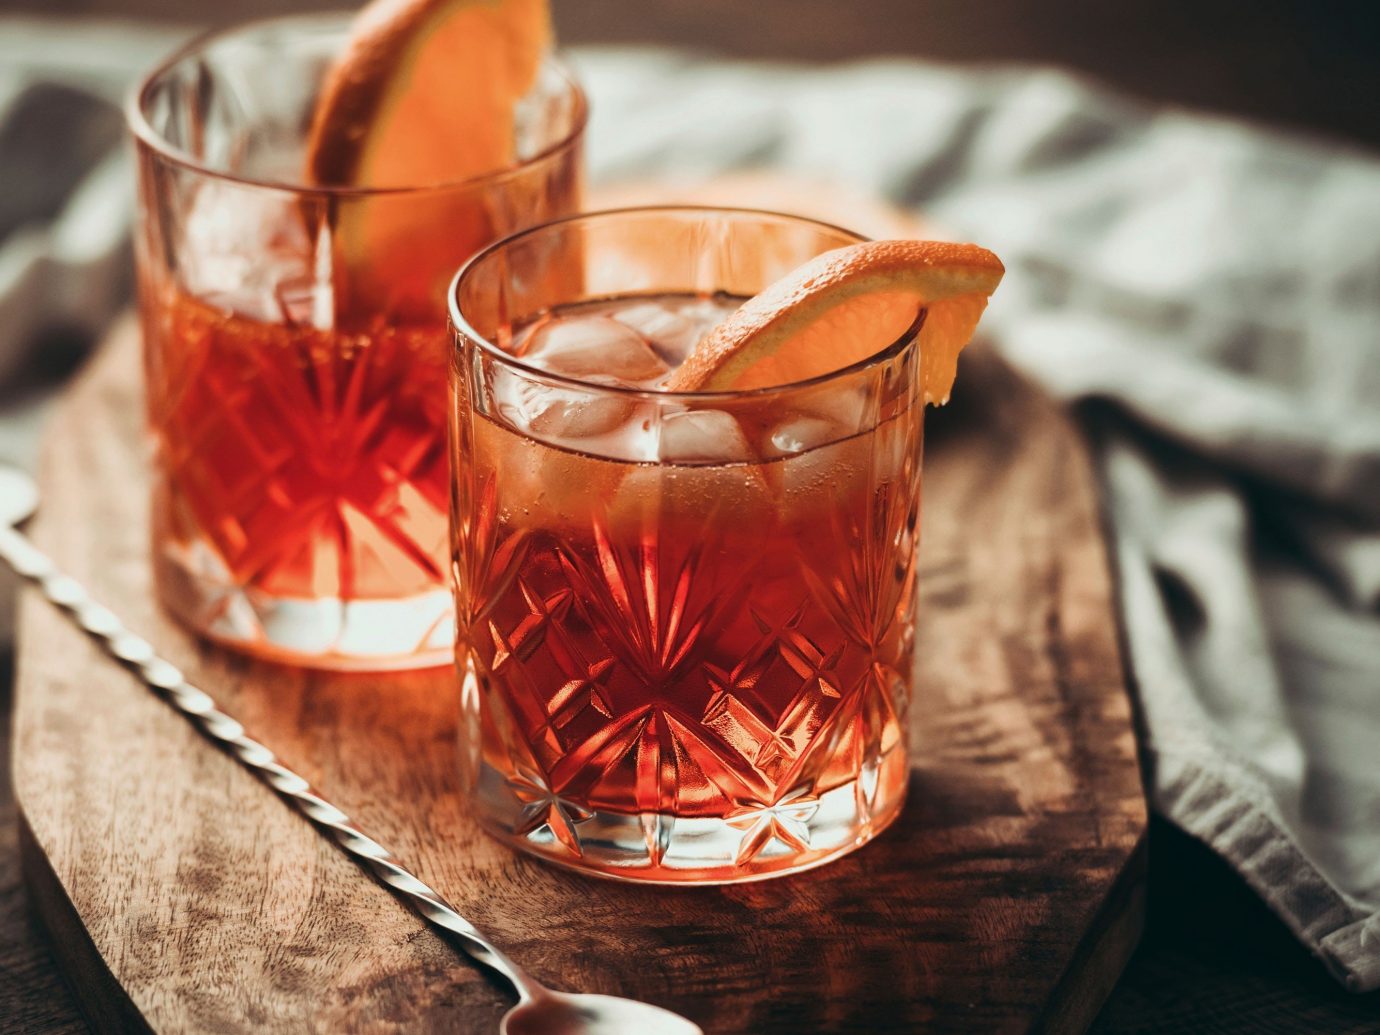 Food + Drink table cup sitting indoor Drink glass alcoholic beverage distilled beverage slice whisky negroni old fashioned container beverage alcohol close meal sliced